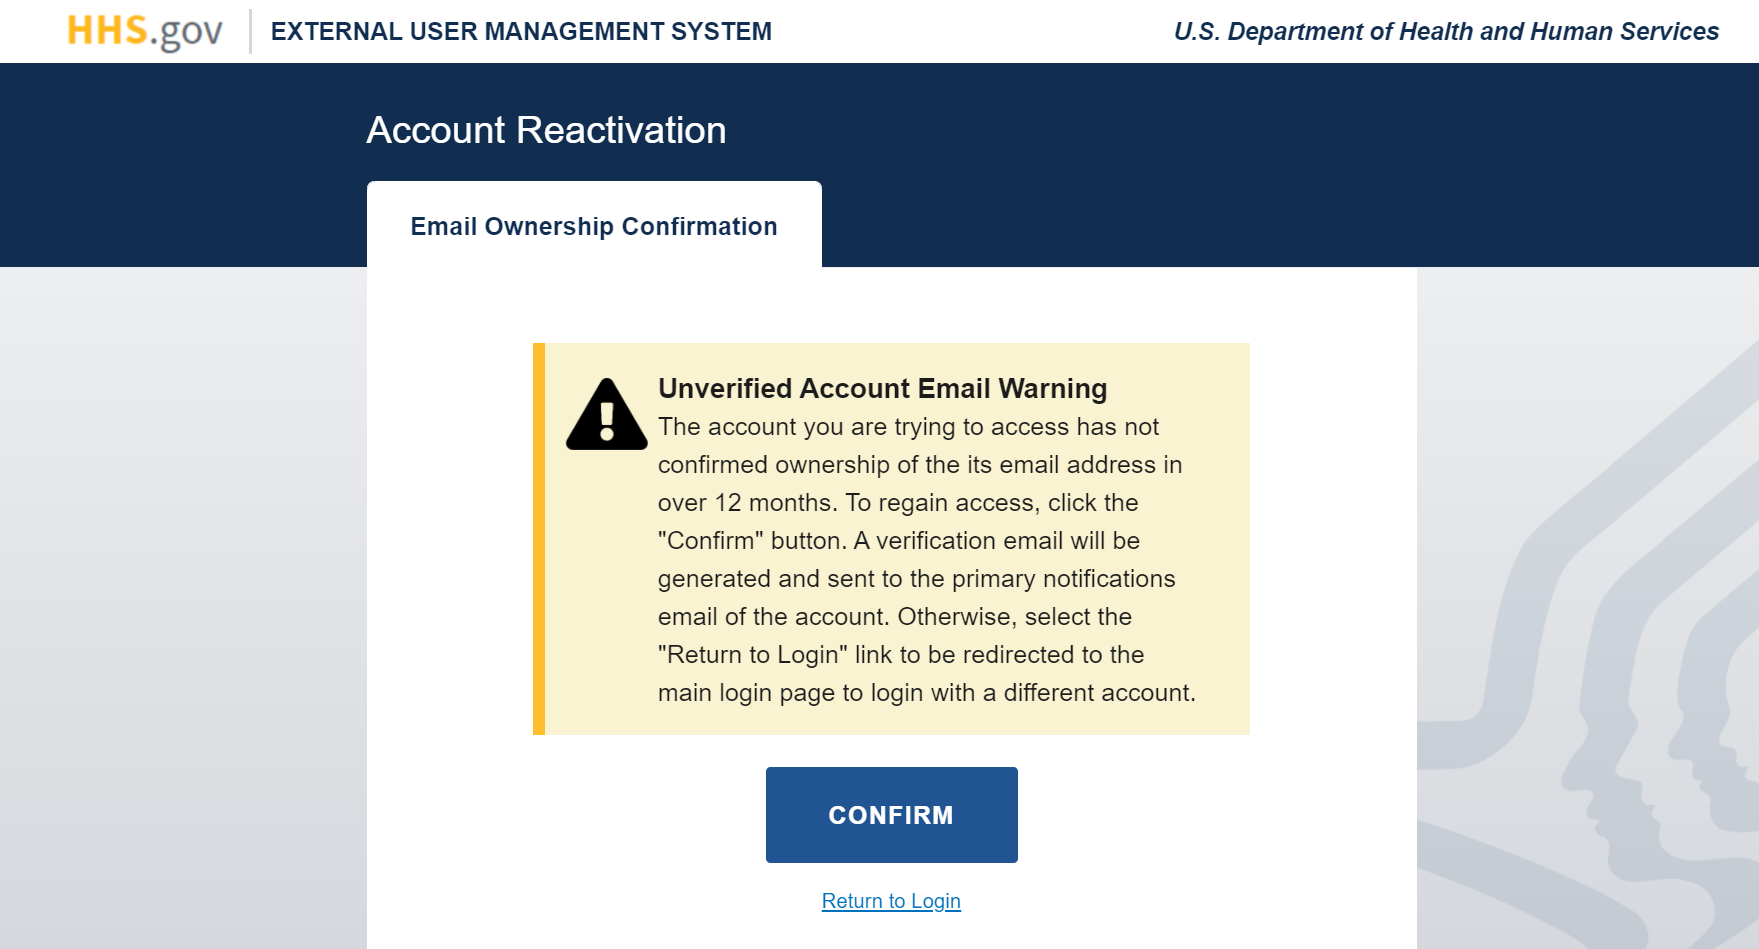 Unverified Account Email Warning message